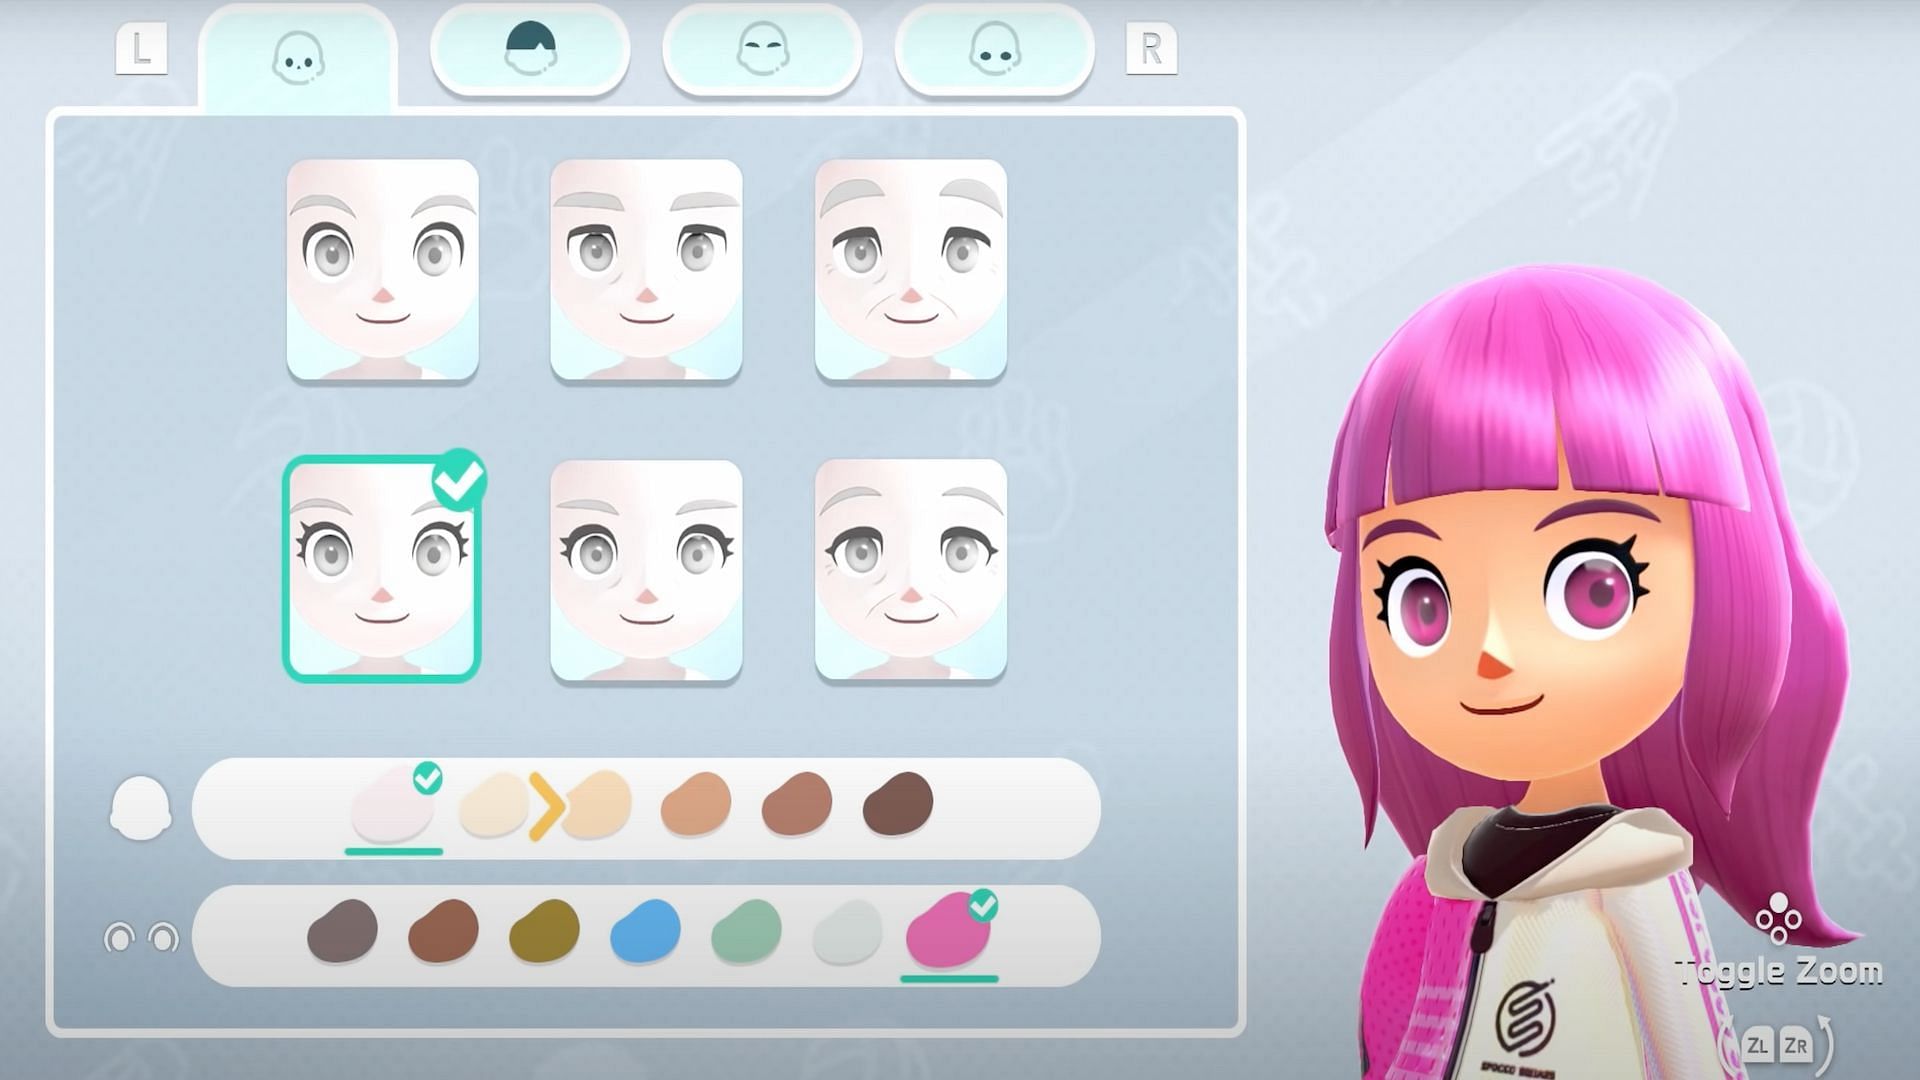 Users can change things such as hairstyle, hair color, eye color, and outfits from the menu (Image via Nintendo)